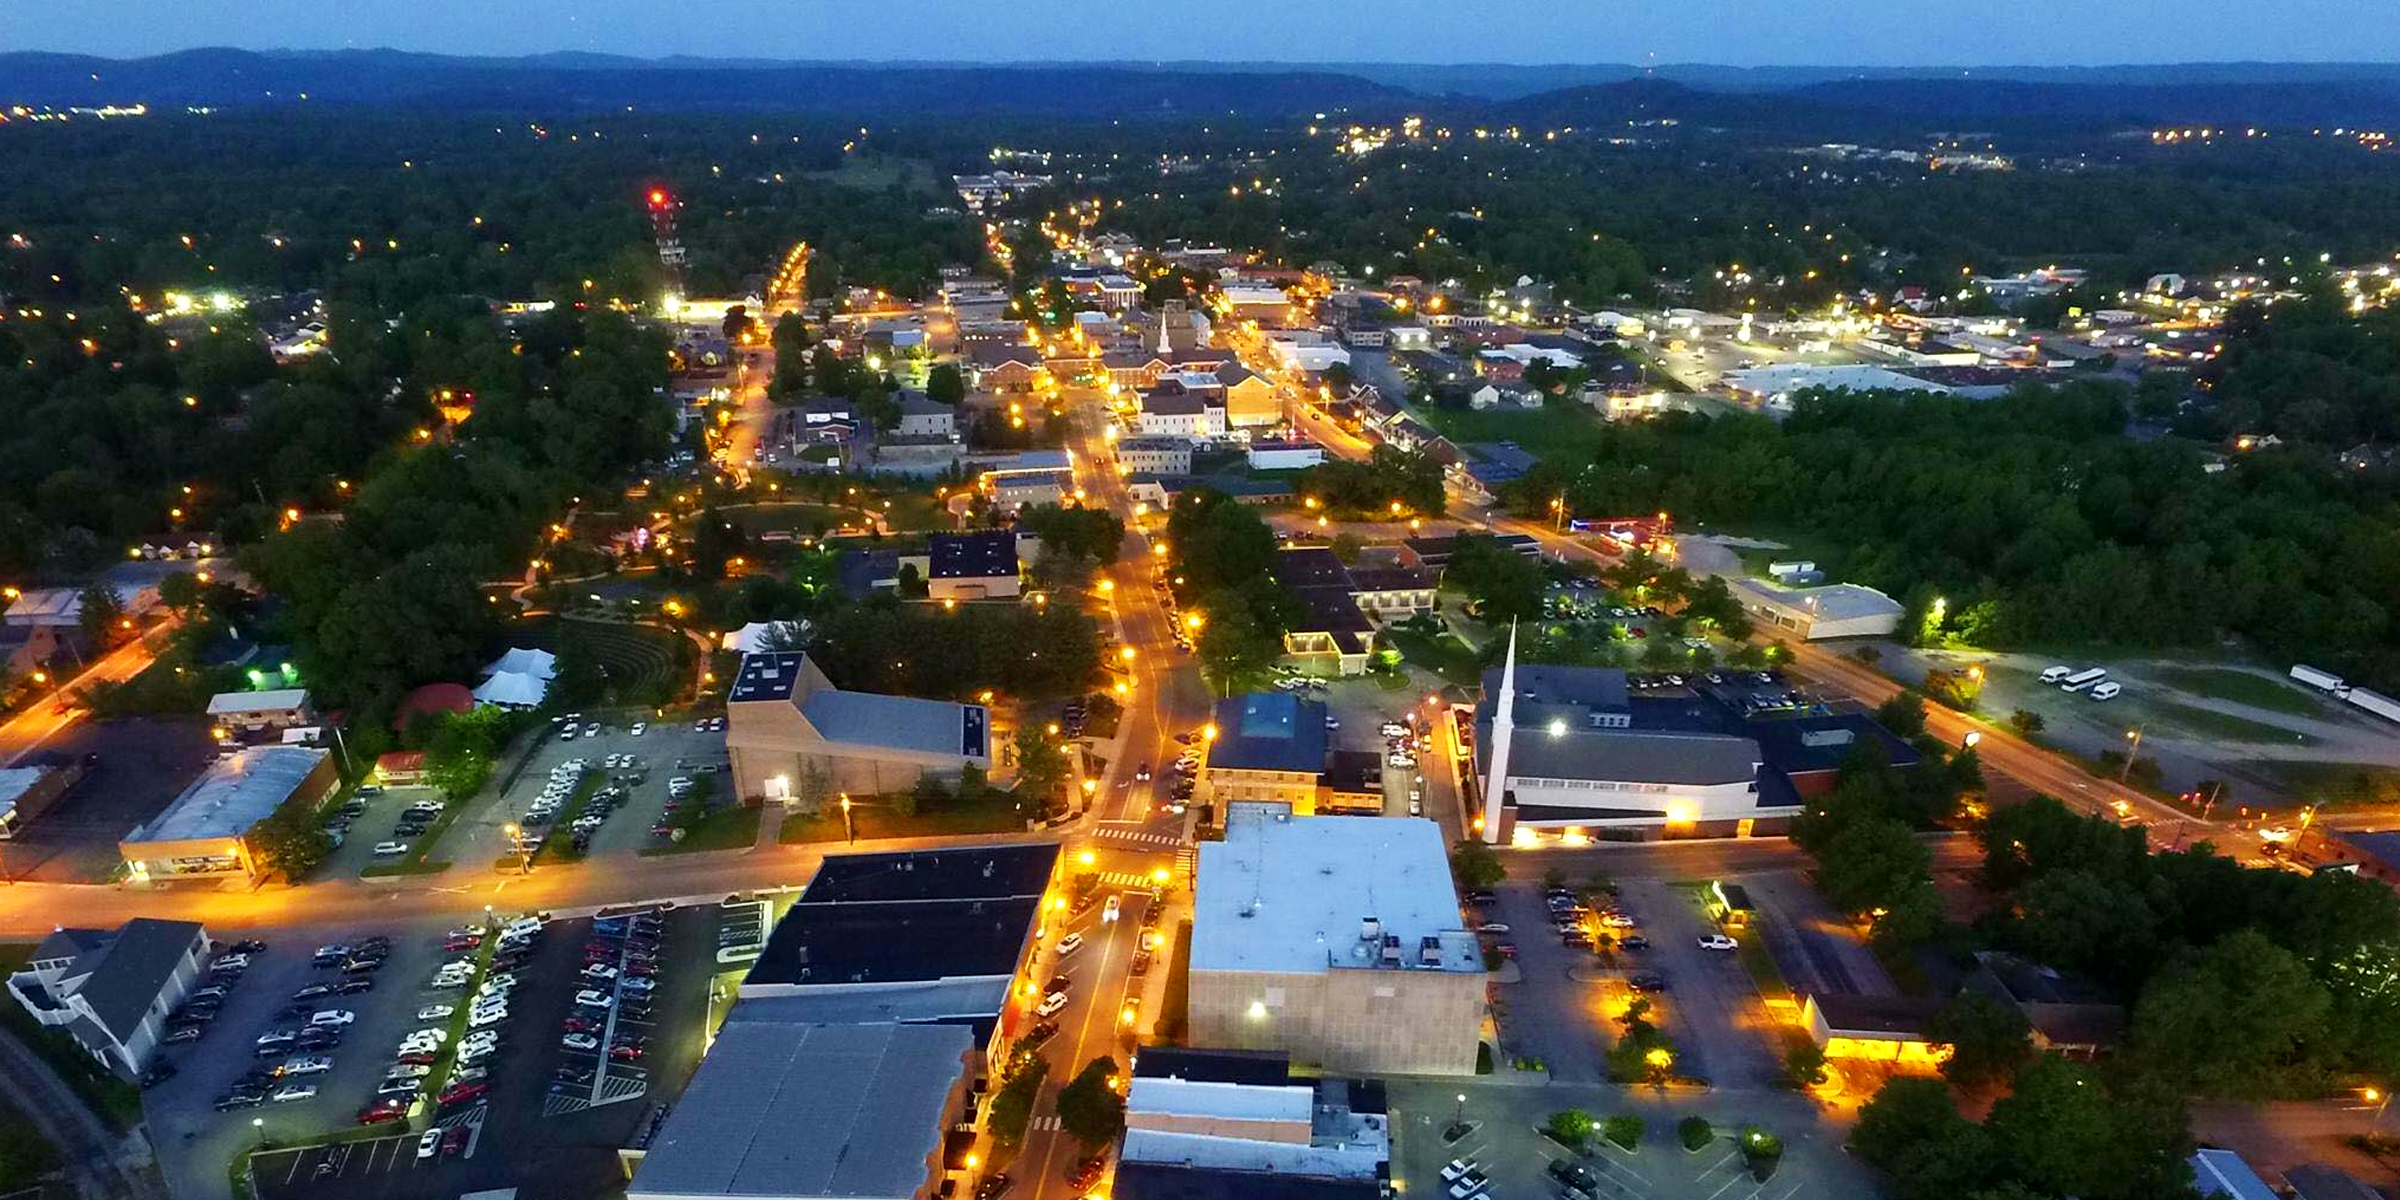 Aerial view of Cookville, TN | Source: facebook.com/HistoricDowntownCookeville